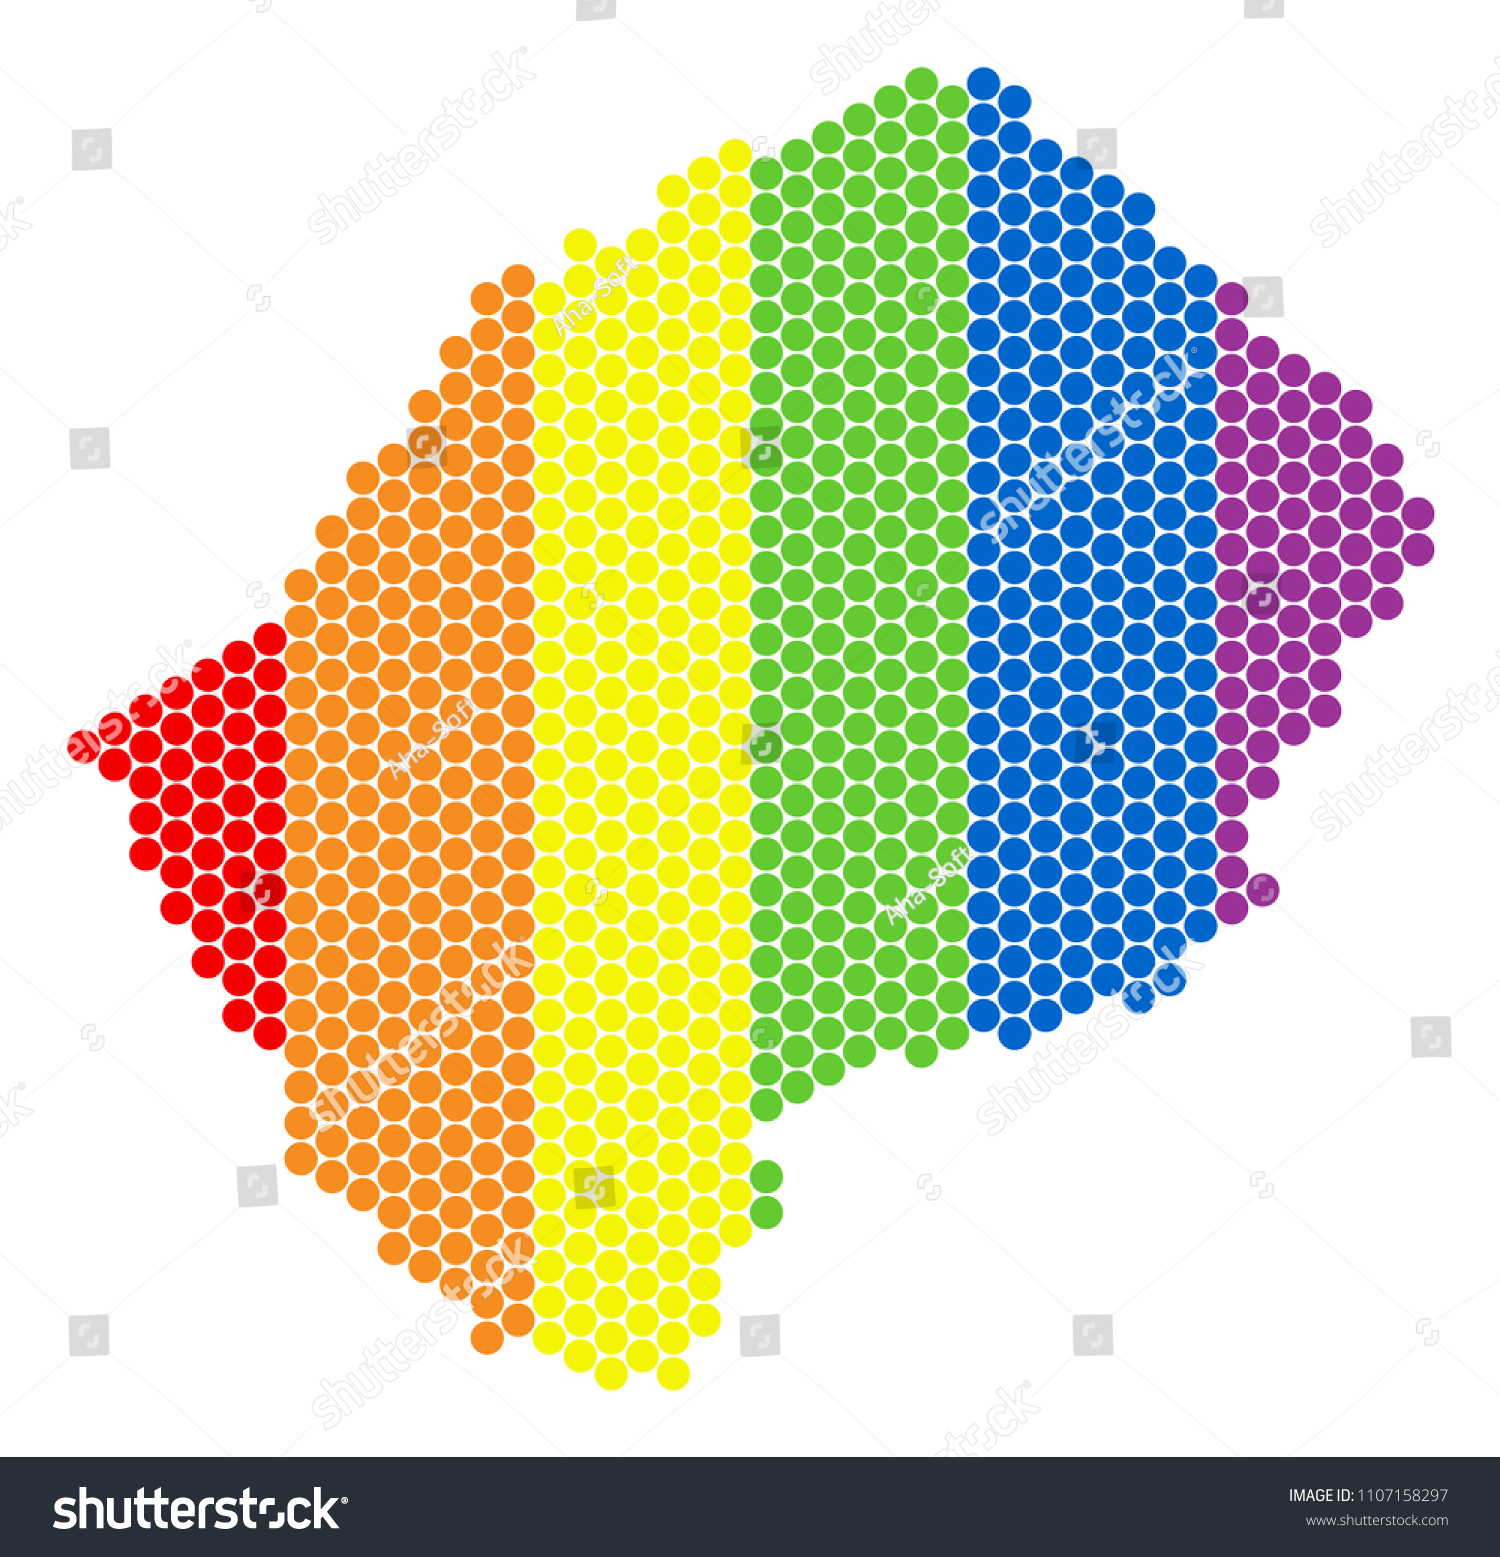 A Dotted Lgbt Lesotho Map For Lesbians Gays Royalty Free Stock Vector 1107158297 9140